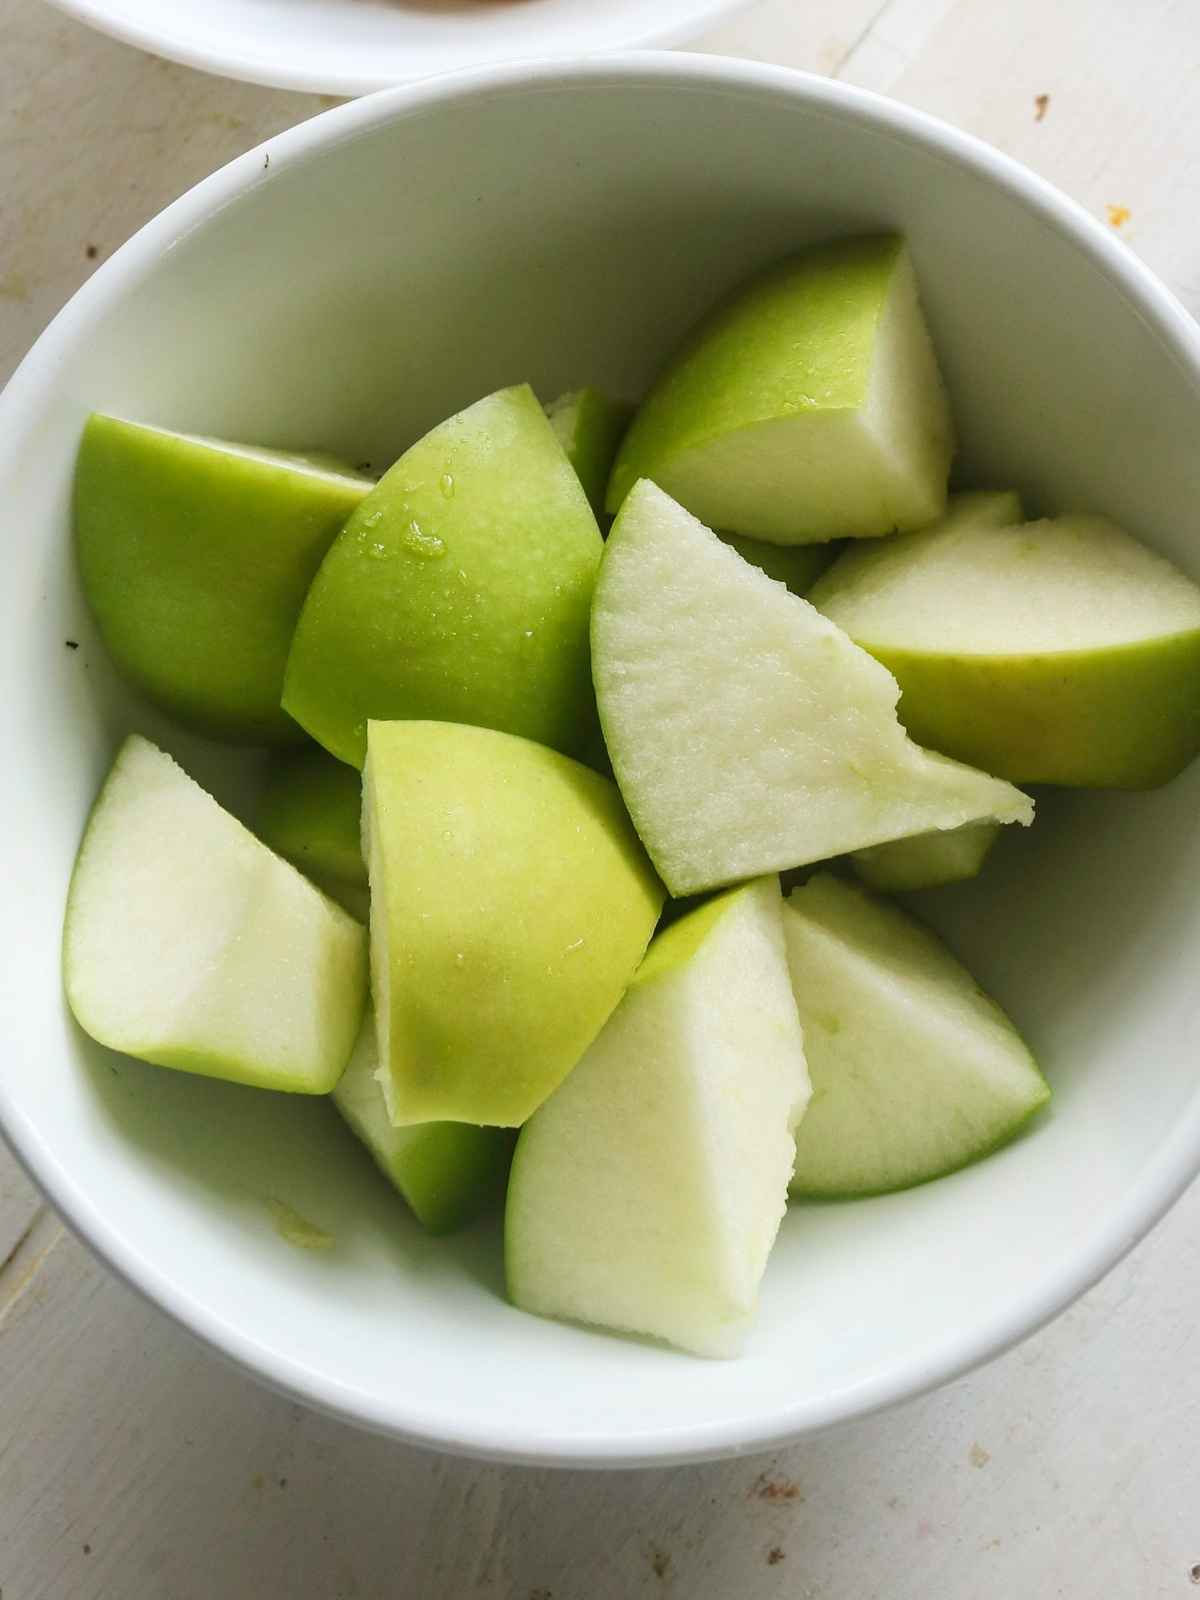 Green apples placed in a white bowl.